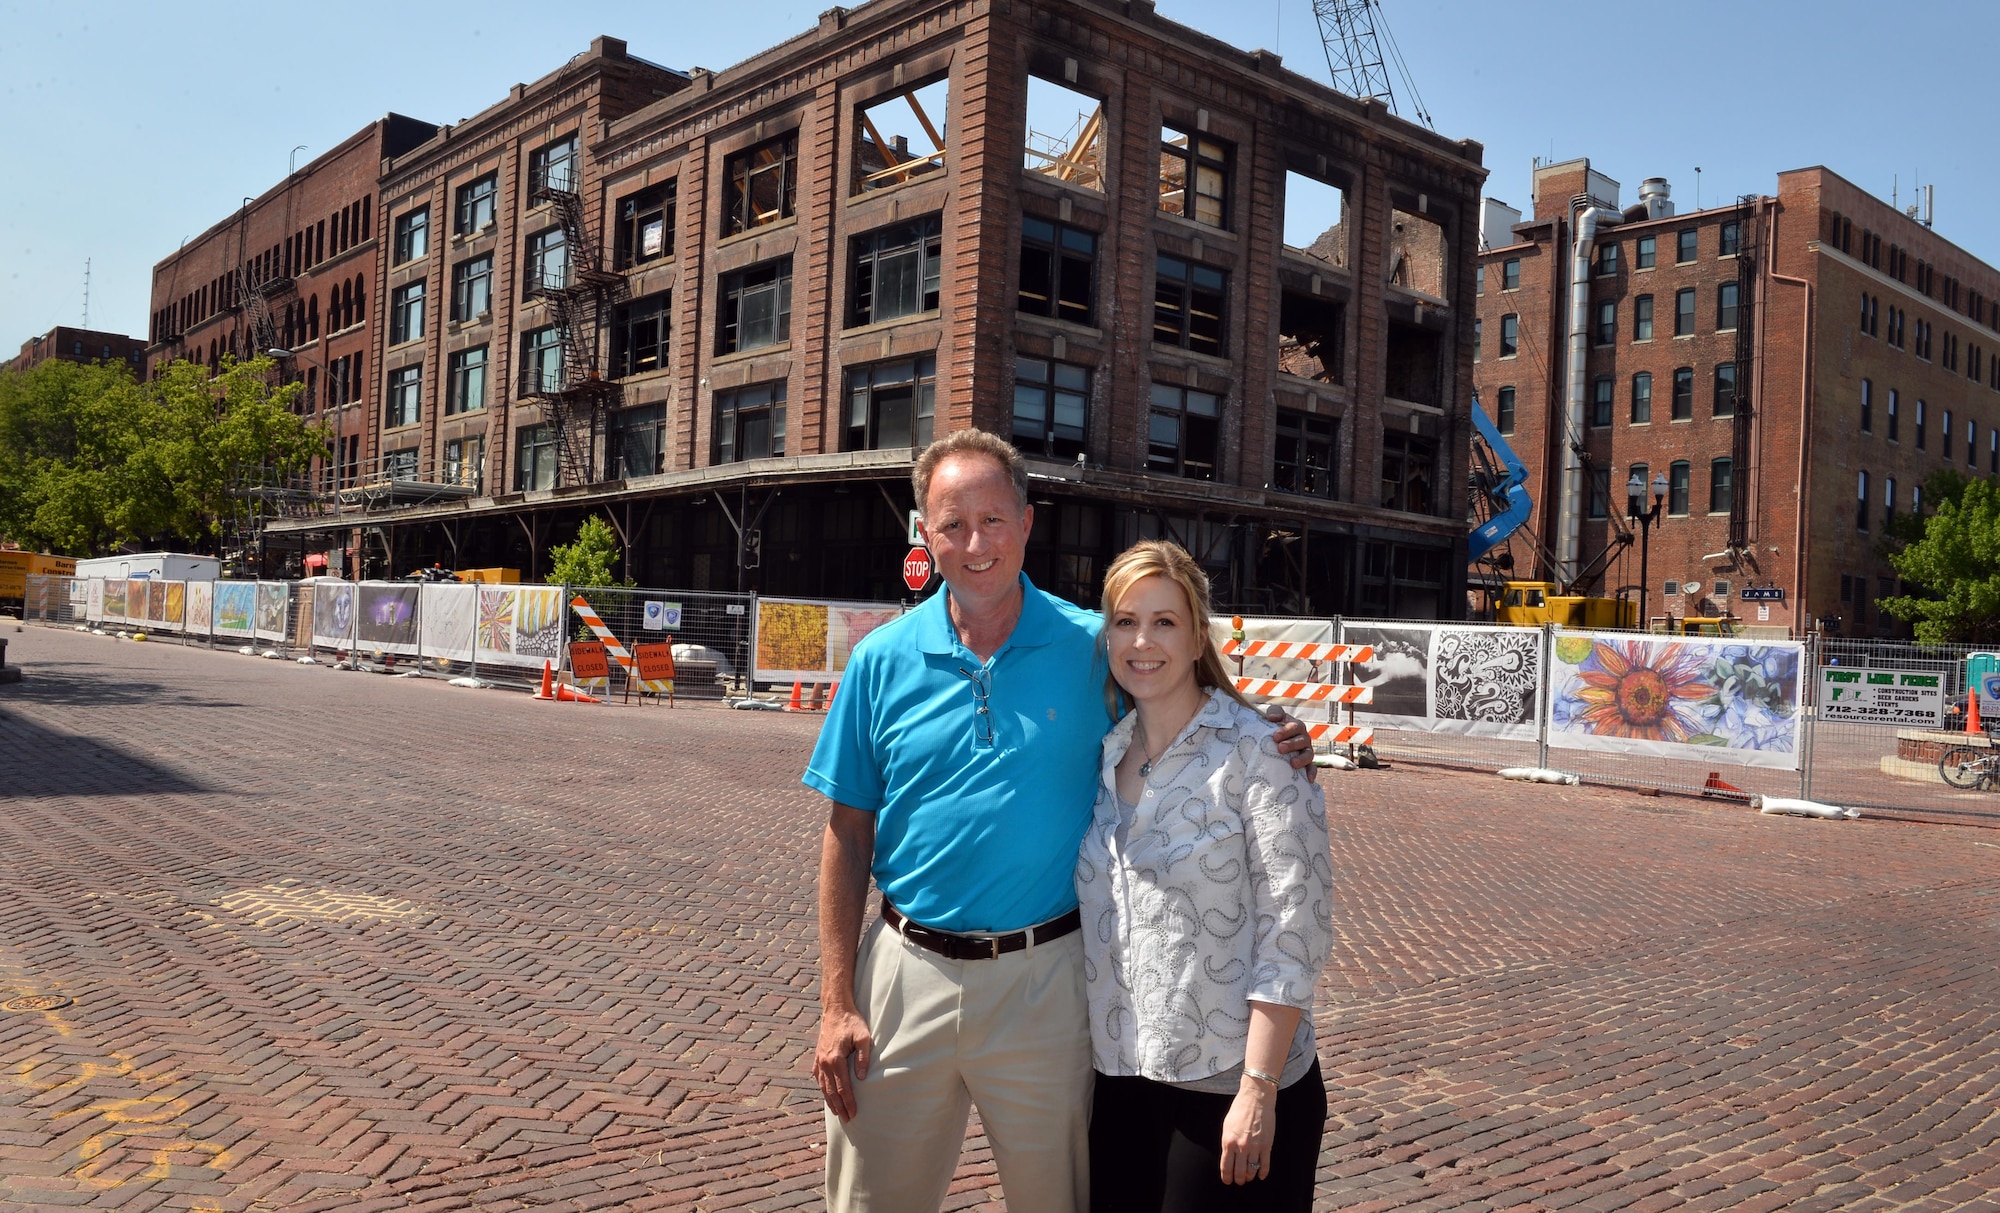 Ken Smith, a weather operations requirements manager with to the 557th Weather Wing, and Lisa Gill, with the 55th Force Support Squadron, stand in front of the Mercer Building in downtown Omaha, Neb., May 5, 2016.  The barrier fence, that surrounds the construction site, is decorated with printed banners depicting Omaha-area artists’ contributions to the Old Market Business Association beautification project designed to shield the site until the restoration is completed.  (U.S. Air Force photo by Josh Plueger/Released)